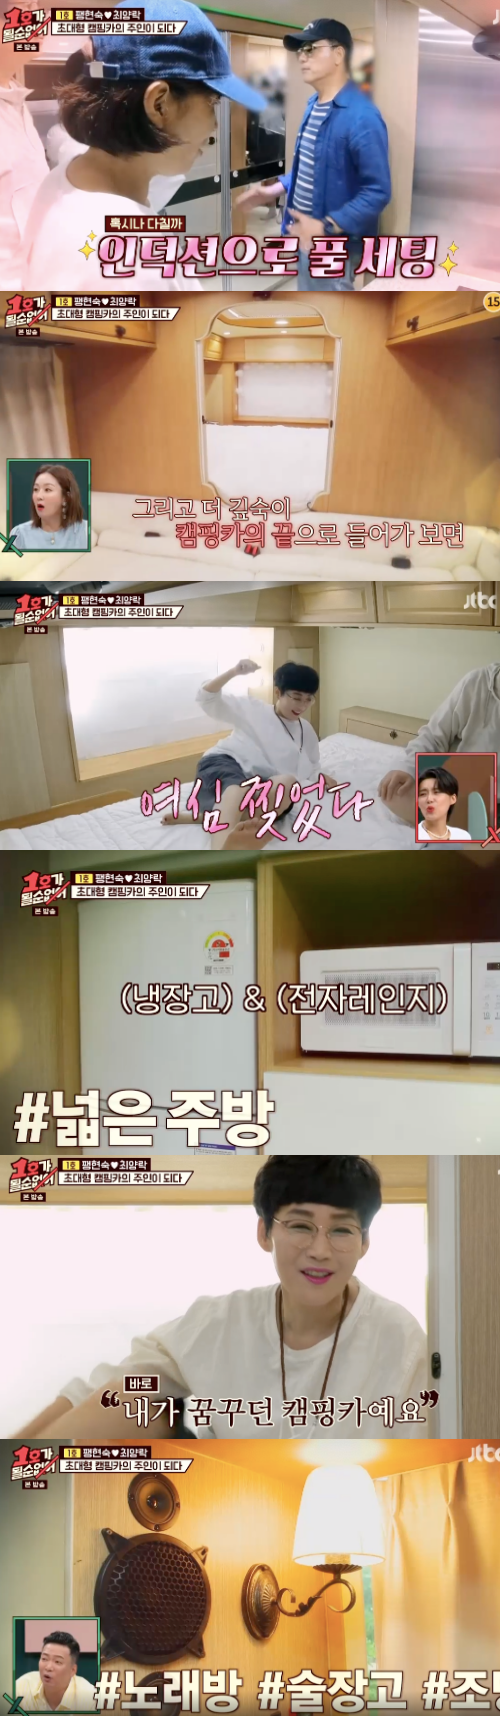 Choi Yang-Rak and Paeng Hyon Sook unveiled a luxurious high-end teardrop trailer in I can not be No. 1.Choi Yang-Rak and Paeng Hyon Sook were drawn on JTBC Entertainment No.1 on the 11th.On this day, Choi Yang-Rak and Paeng Hyon Sook appeared, and the two people who were the first test drive of the Teardrop trailer were excited.The two people recently reported on the Teardrop trailer, saying, I bought the Teardrop trailer with half of the Kims and the couple.The luxurious Teardrop trailer was then unveiled.Karaoke and liquor refrigerators are all envious of the large teardrop trailer visuals, saying, It is too wide, it is 30 pyeong.Kim even prepared the lumbars for the menopause Paeng Hyon Sook.Paeng Hyon Sook, who often goes to the bathroom, was impressed, and Choi Yang-Rak was jealous of growing up cuddles.On the other hand, Paeng Hyon Sook was delighted to say, I dreamed of a teardrop trailer. It was a large bus with a capacity of 46 passengers.Choi Yang-Rak said, This is too big. Kim was shocked by Choi Yang-Rak because the oil price was 500,000 won at a time.In addition, Choi Yang-Rak, who was dissatisfied with the difficult parking situation, said, I am 50 points, too big, and 46 passengers are too much for camping four.Paeng Hyon Sook laughed, saying, What did you do and did not invest at all, and If you have a complaint, you can go and get out.I can not be No. 1 captures the broadcast screen